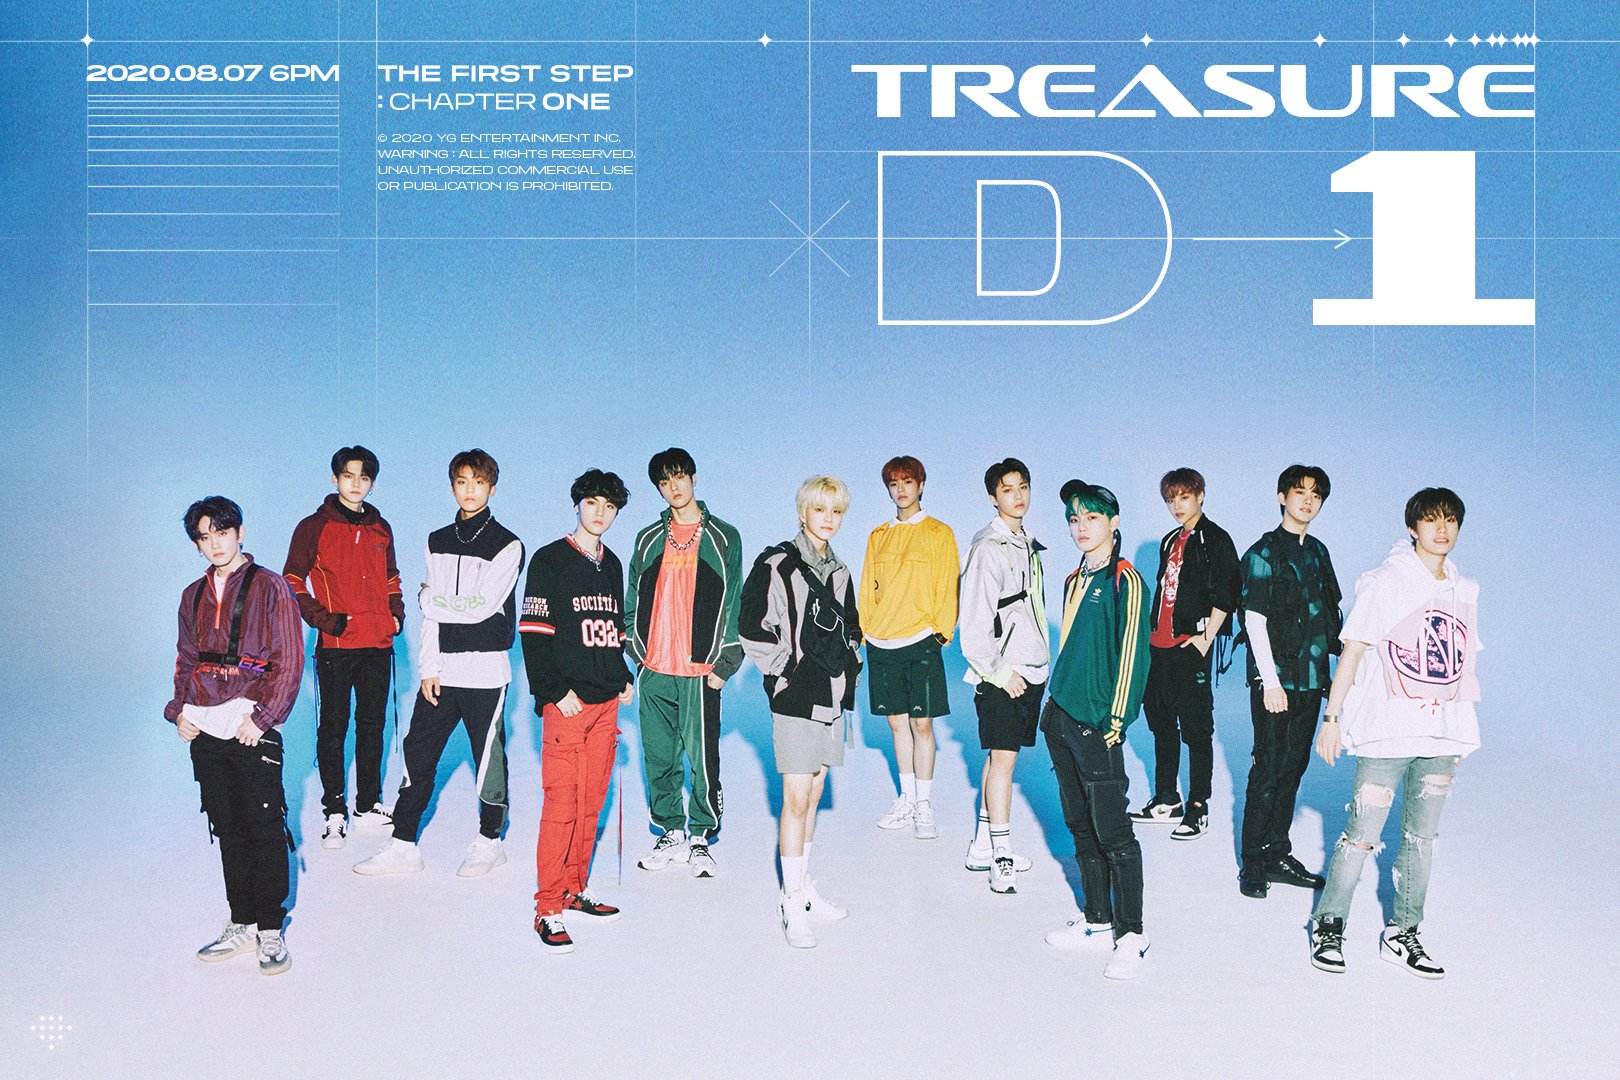 #TREASURE ‘THE FIRST STEP : CHAPTER ONE’ D-1 POSTER